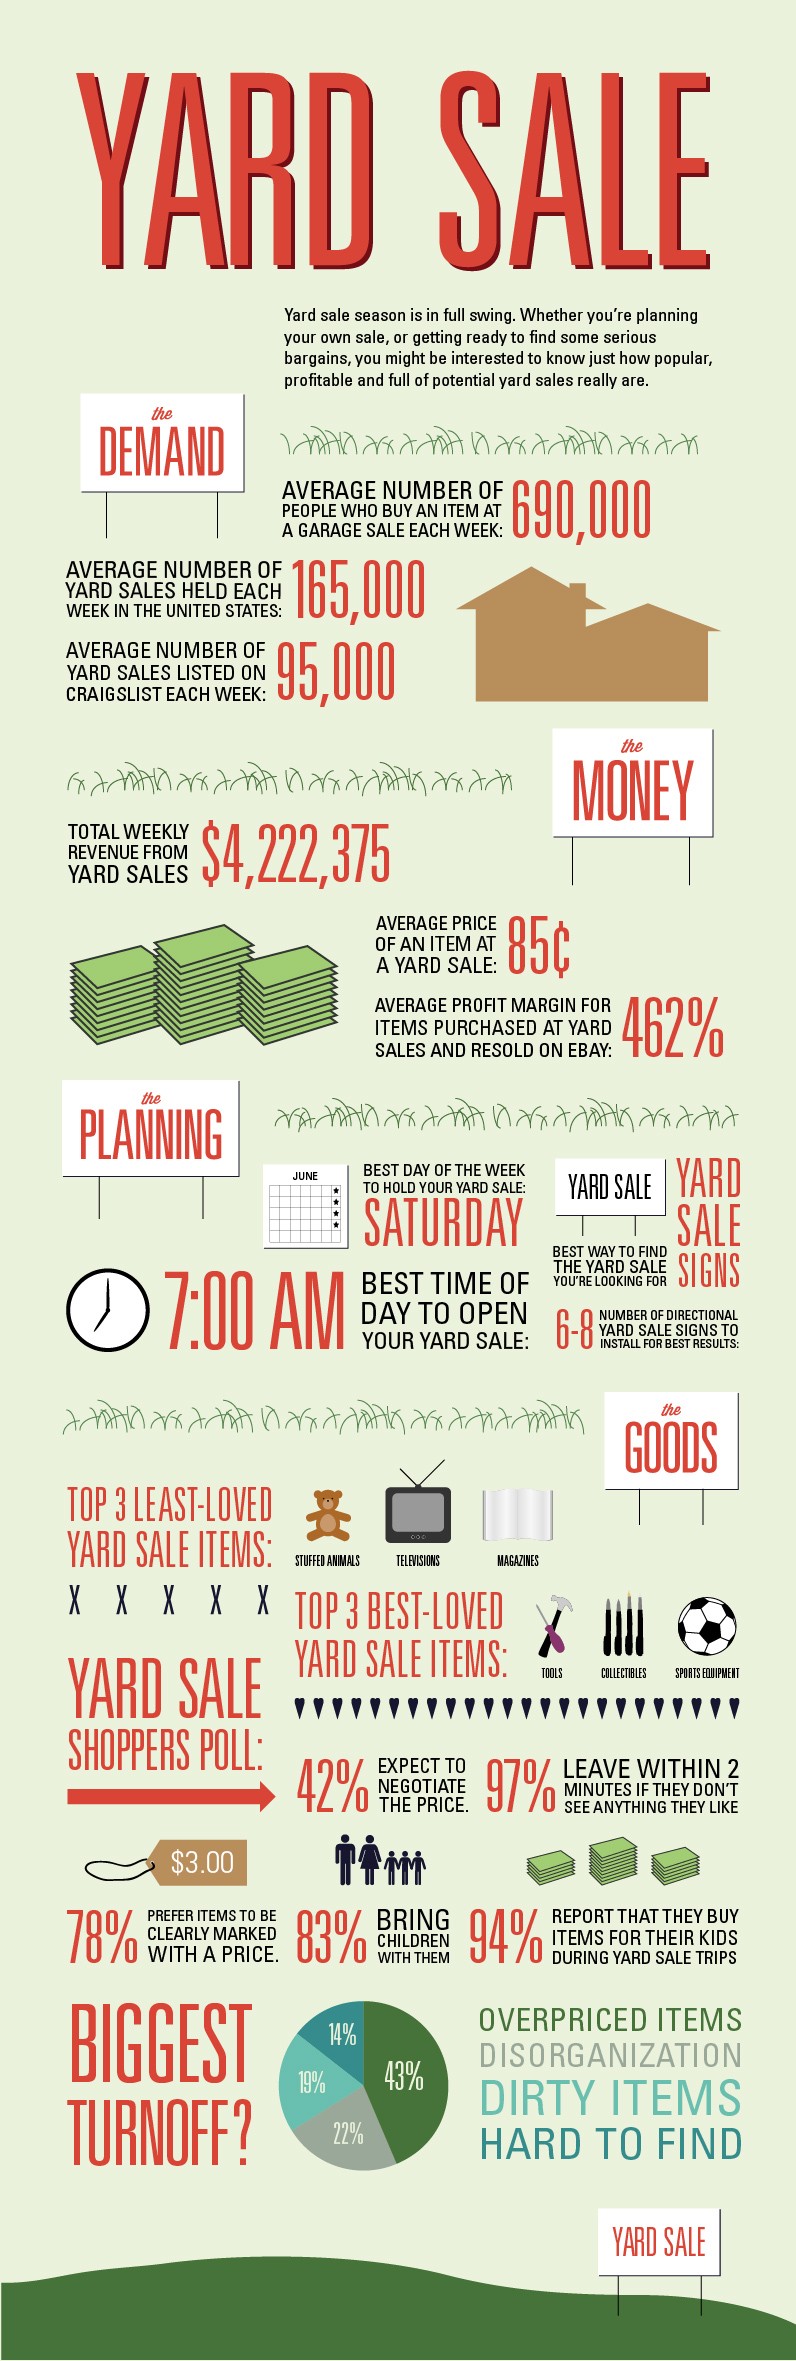 Yard Sale Stats and Facts